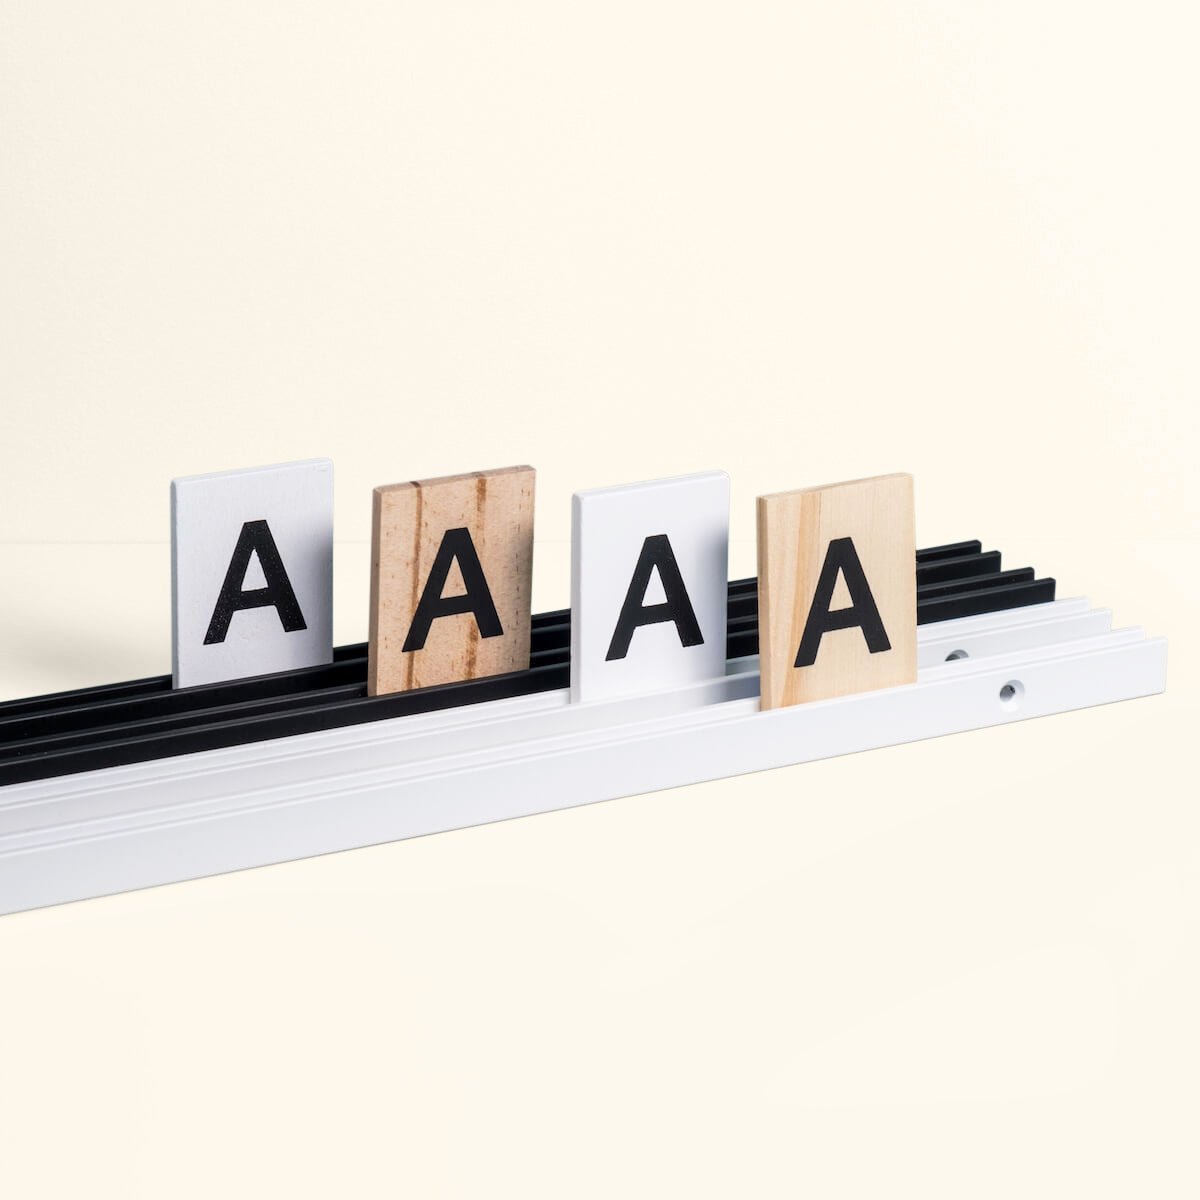 Extra Wooden Letter Board Tiles - George & Willy EU